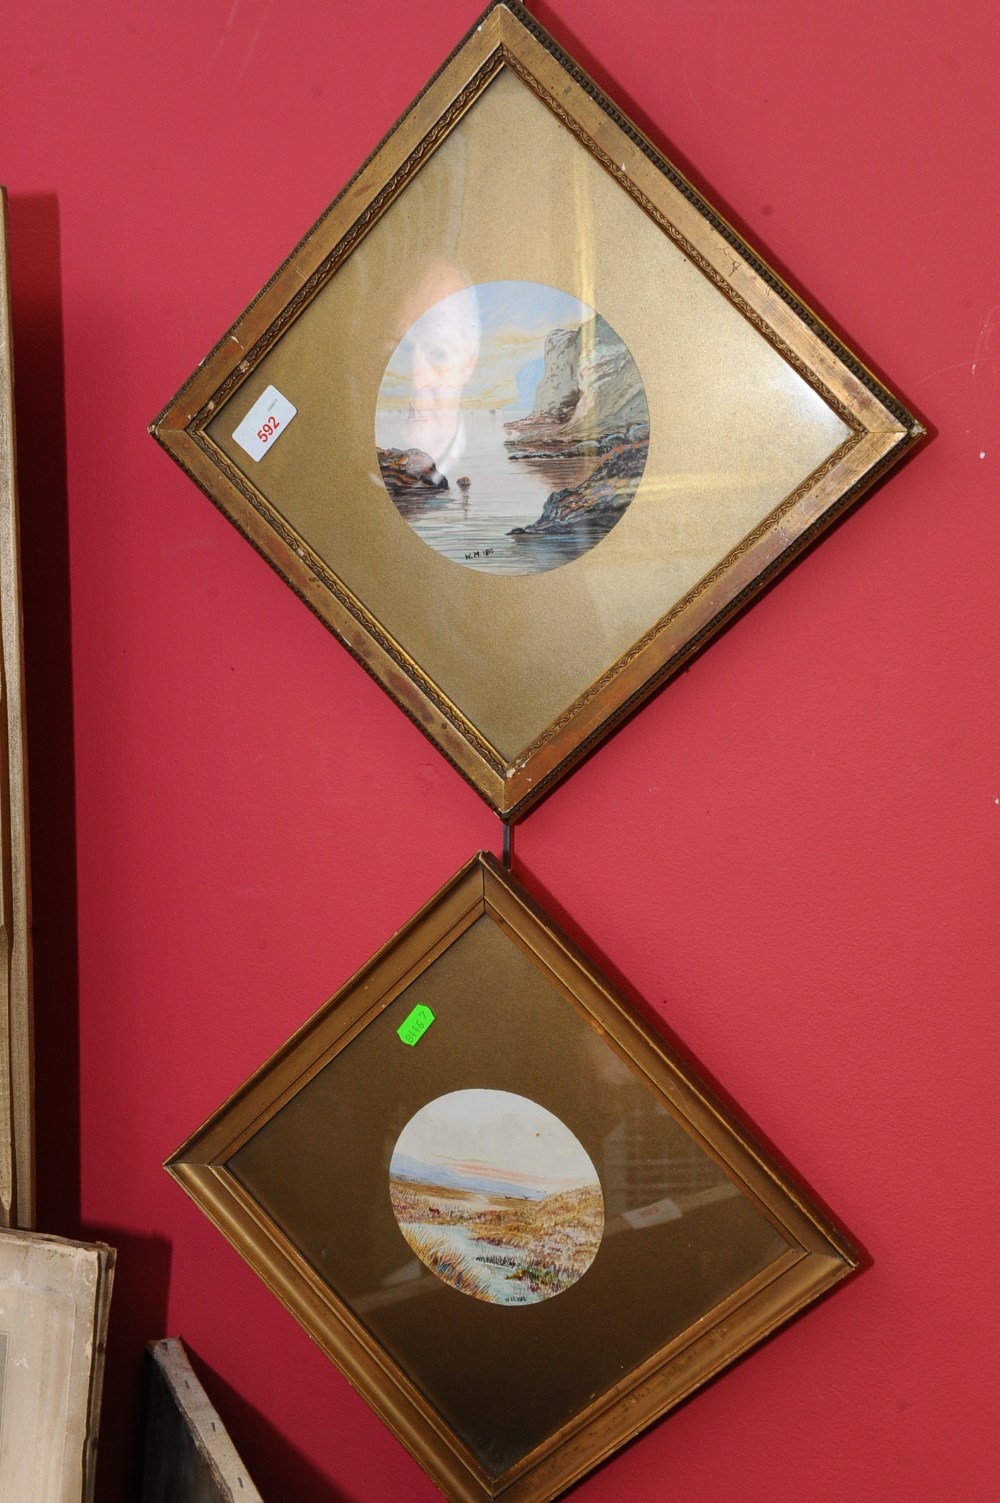 Two early 20th century circular watercolours of coastal scenes, initialed W.M. 1910, framed and